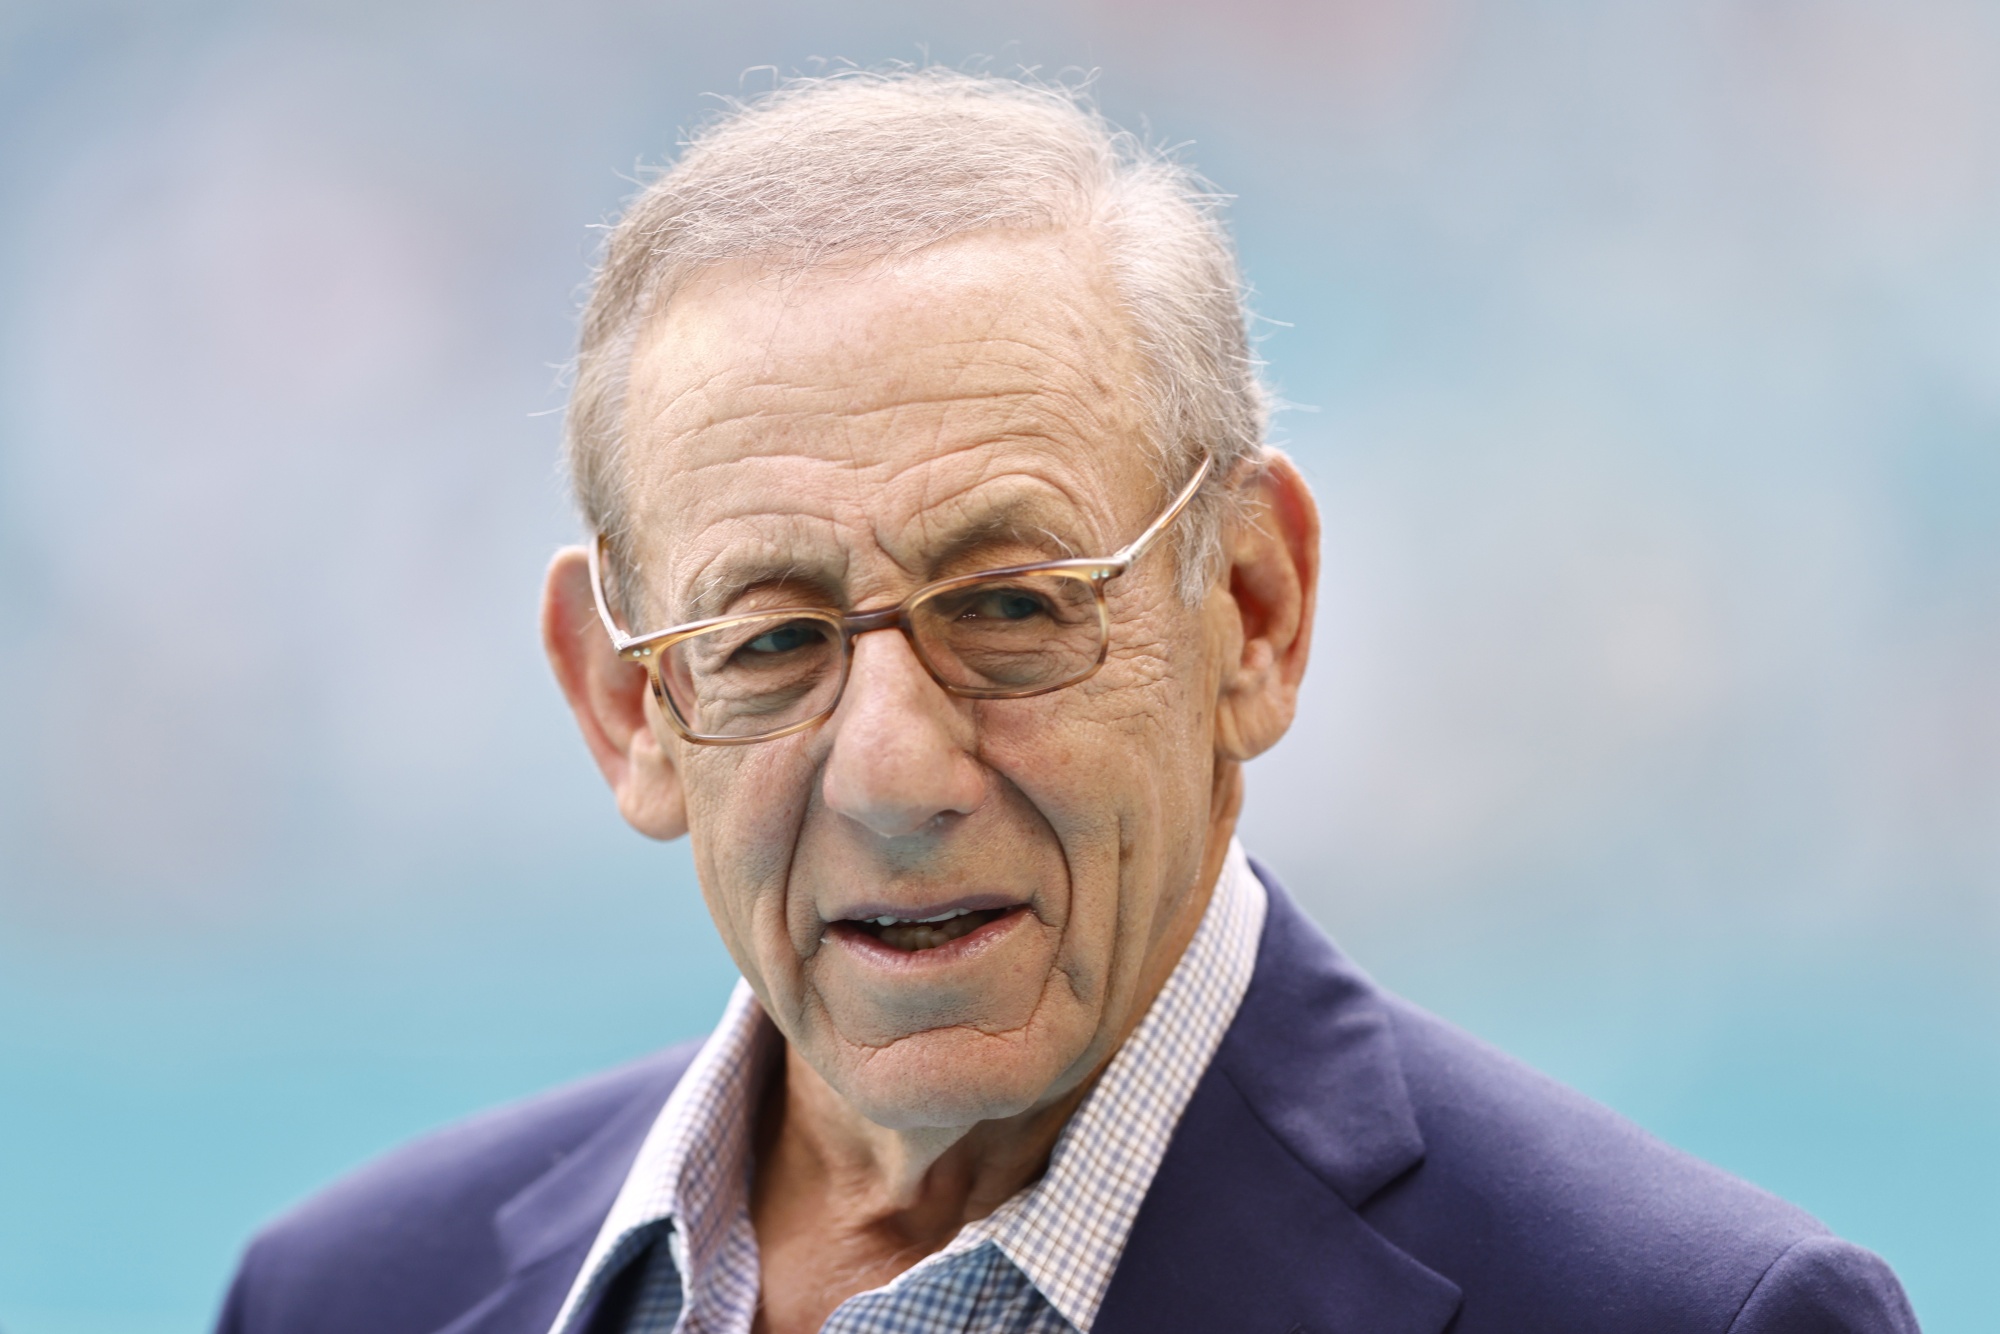 Dolphins owner Stephen Ross seemingly shoots down those Tom Brady rumors